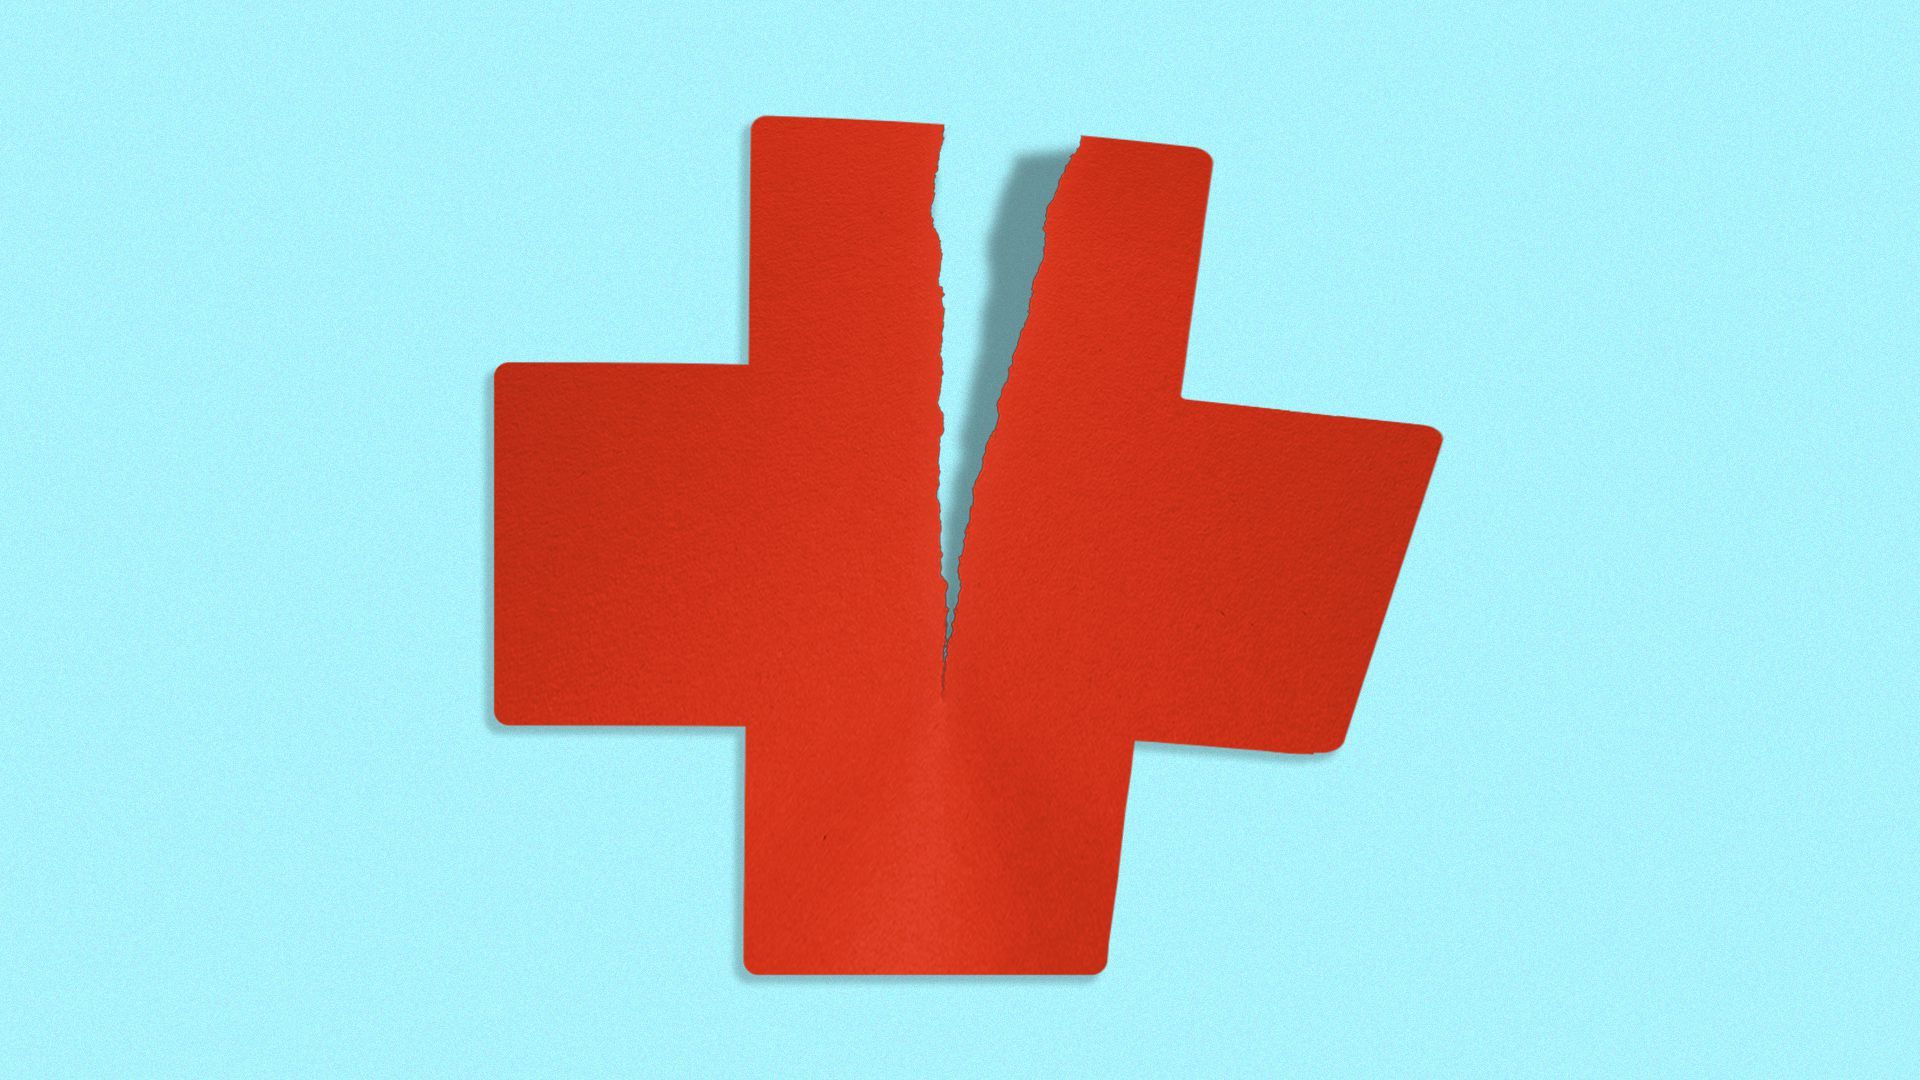 Illustration of a red cross being torn in half.